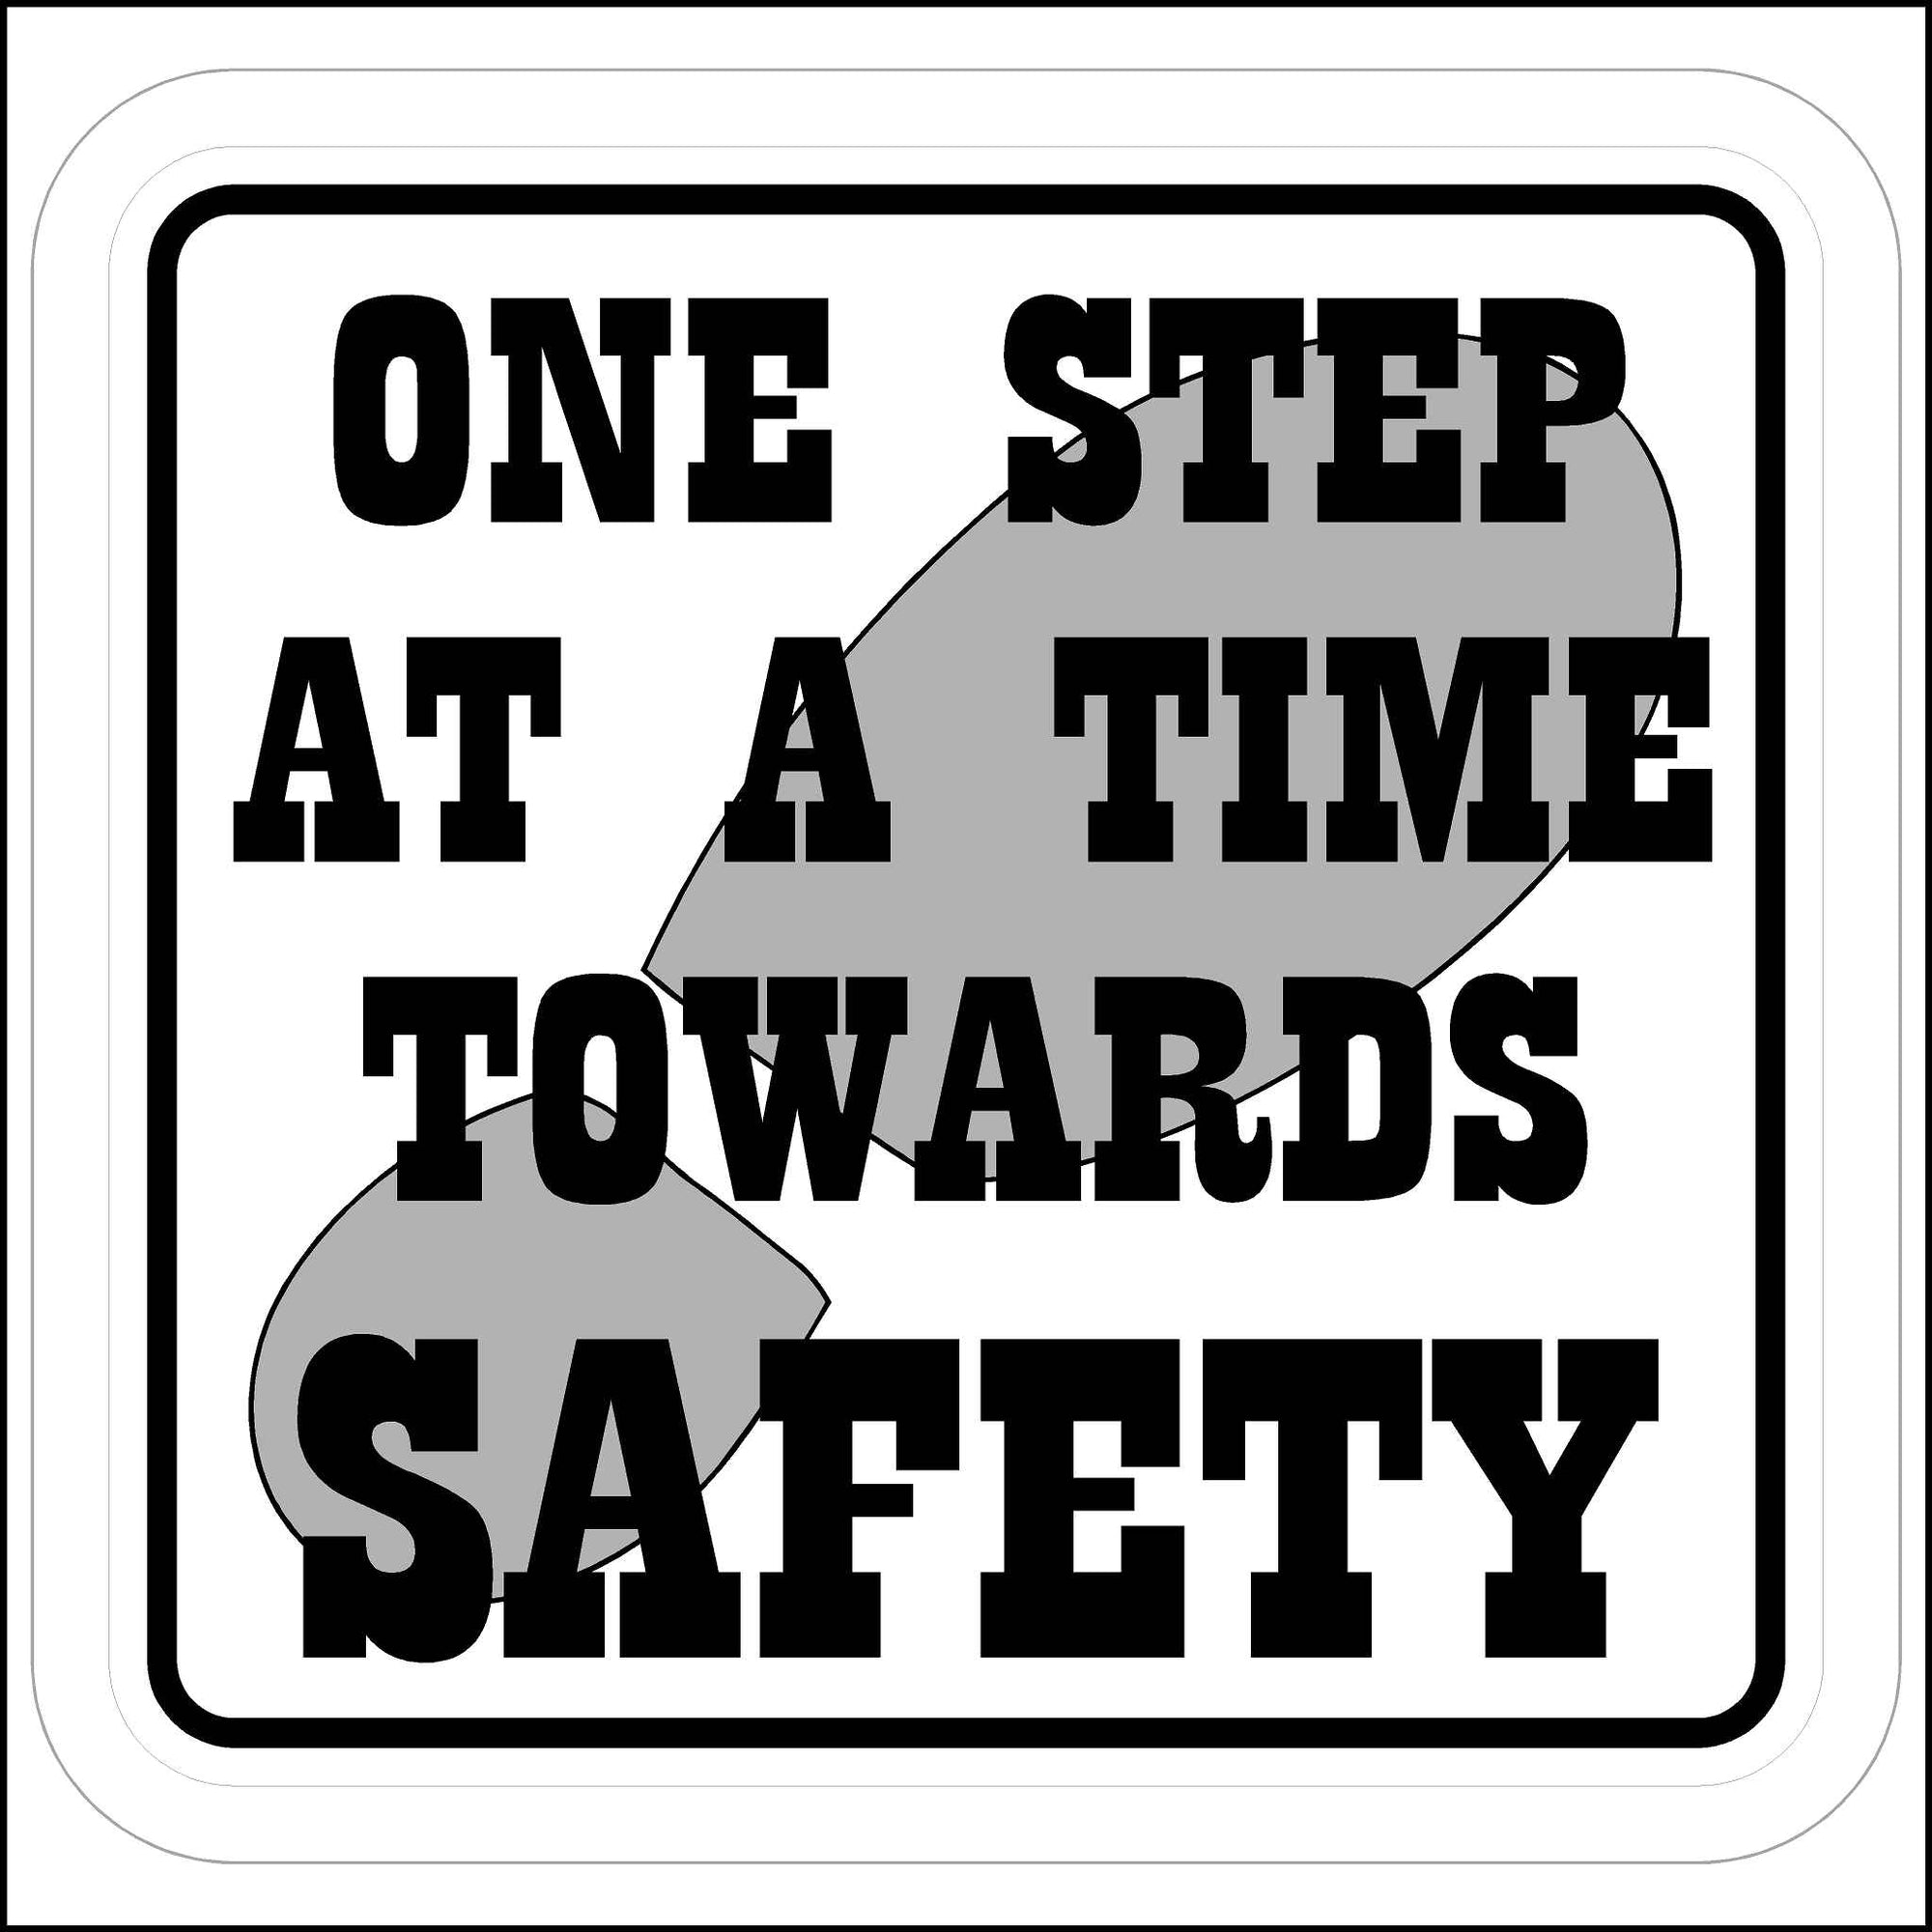 Black and White in color One Step at a Time Towards Safety Sticker.